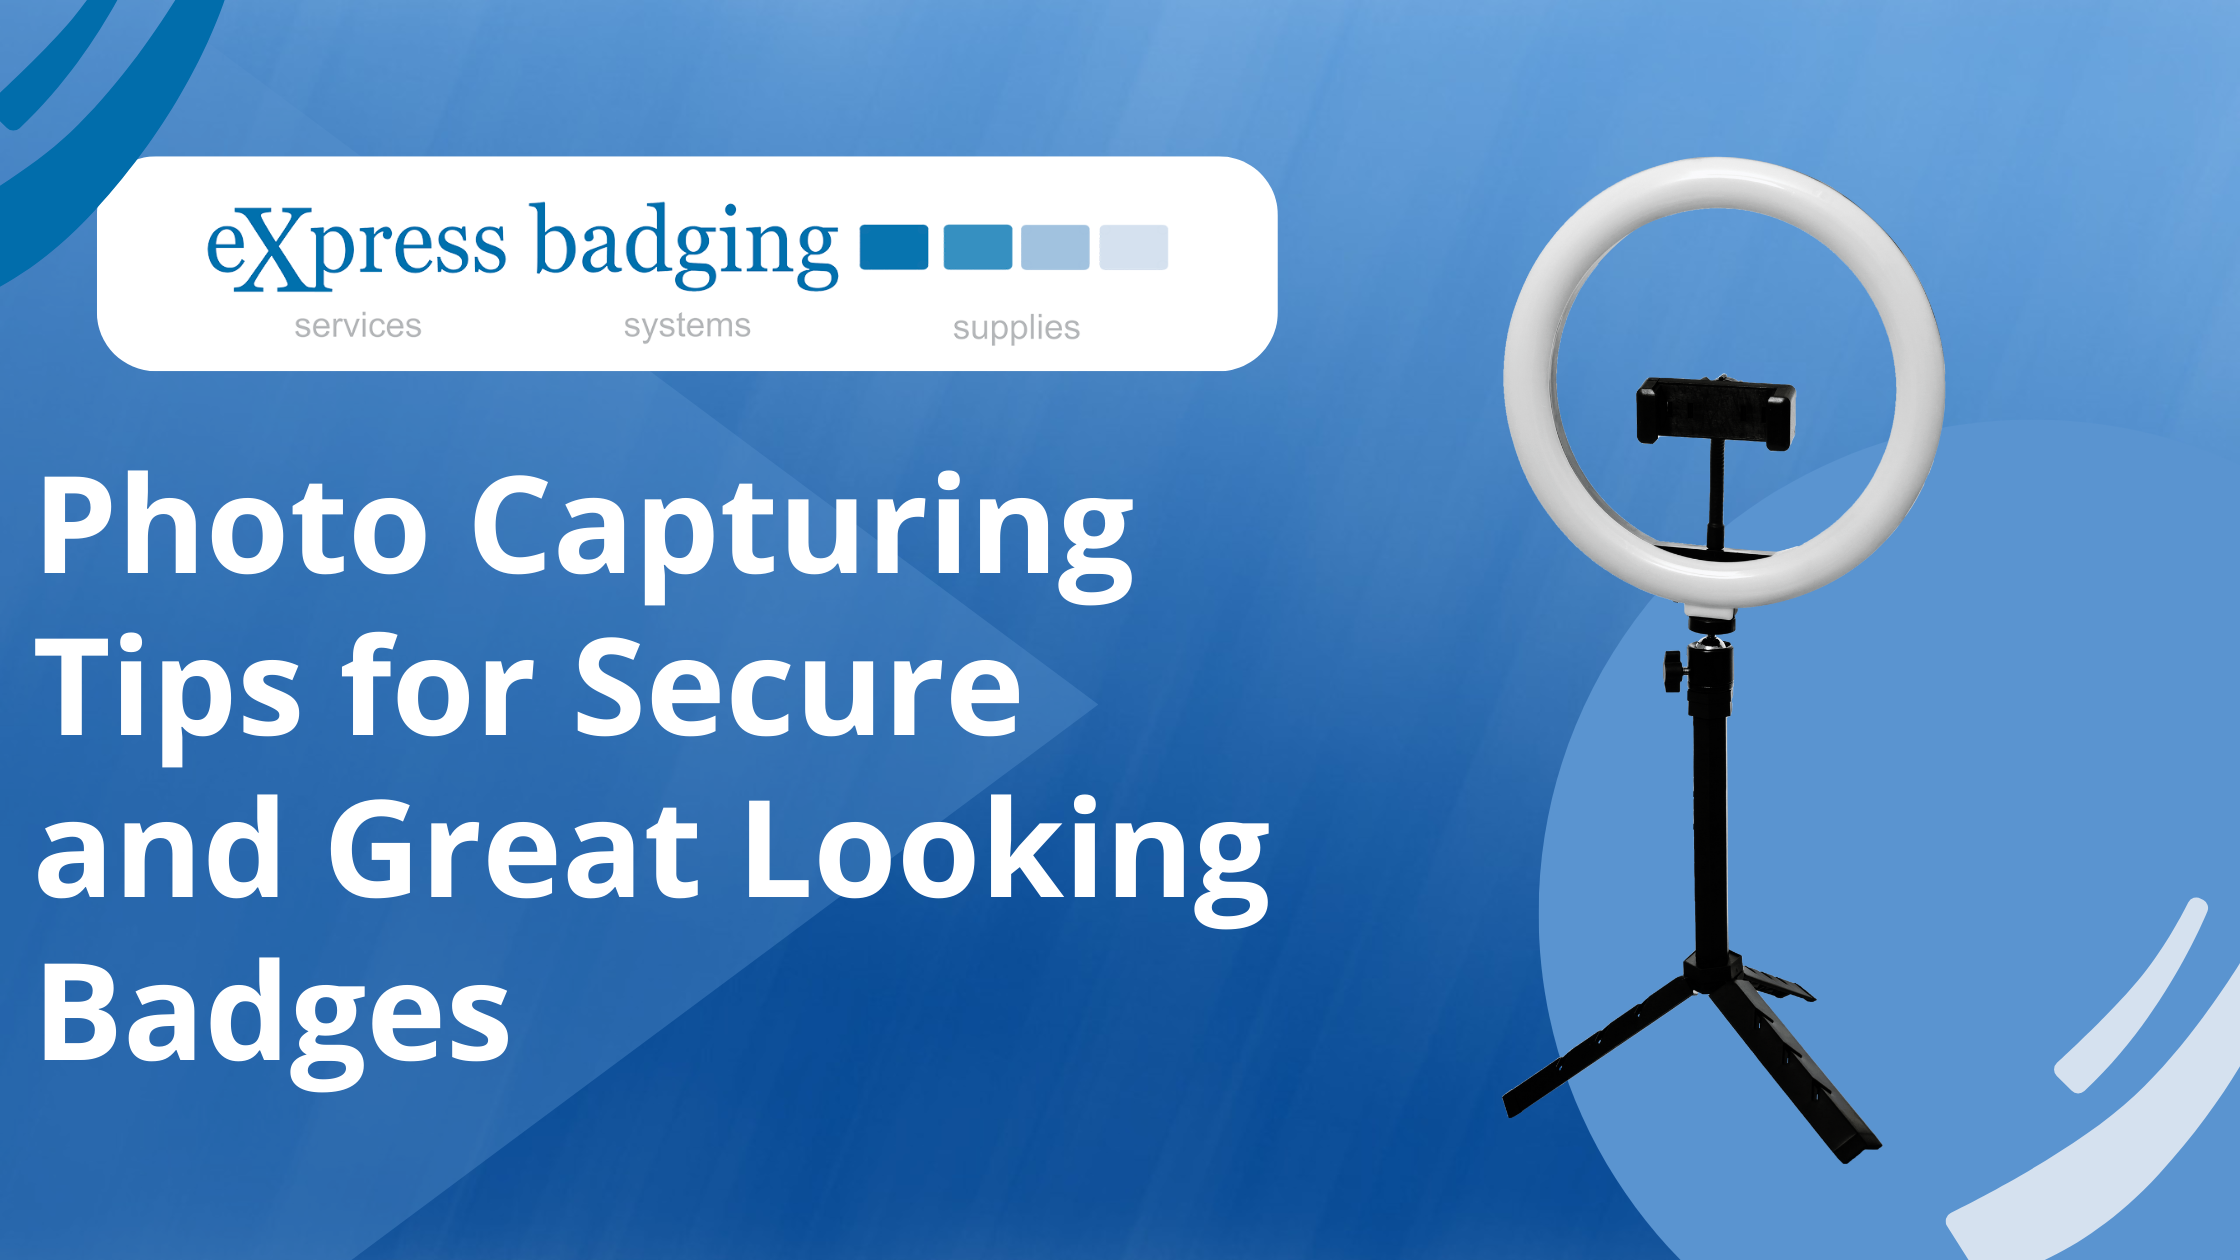 Photo Capturing Tips for Secure and Great Looking Badges